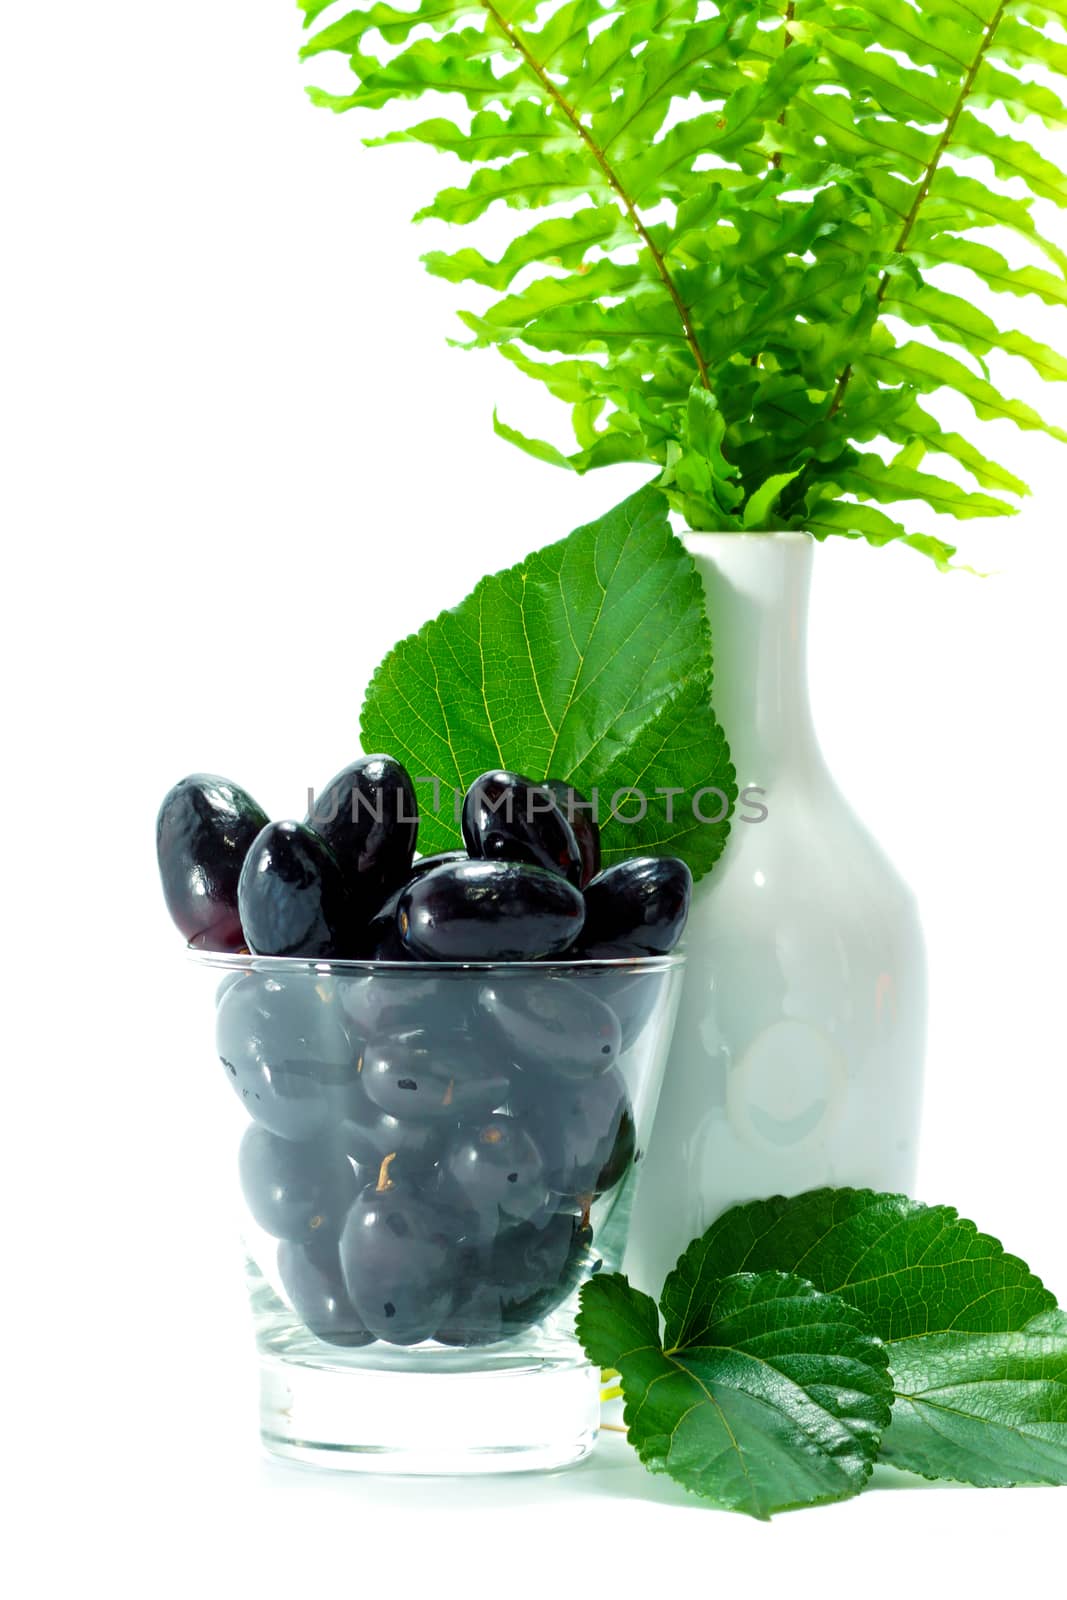 Black grapes in a glass isolated on a white background.